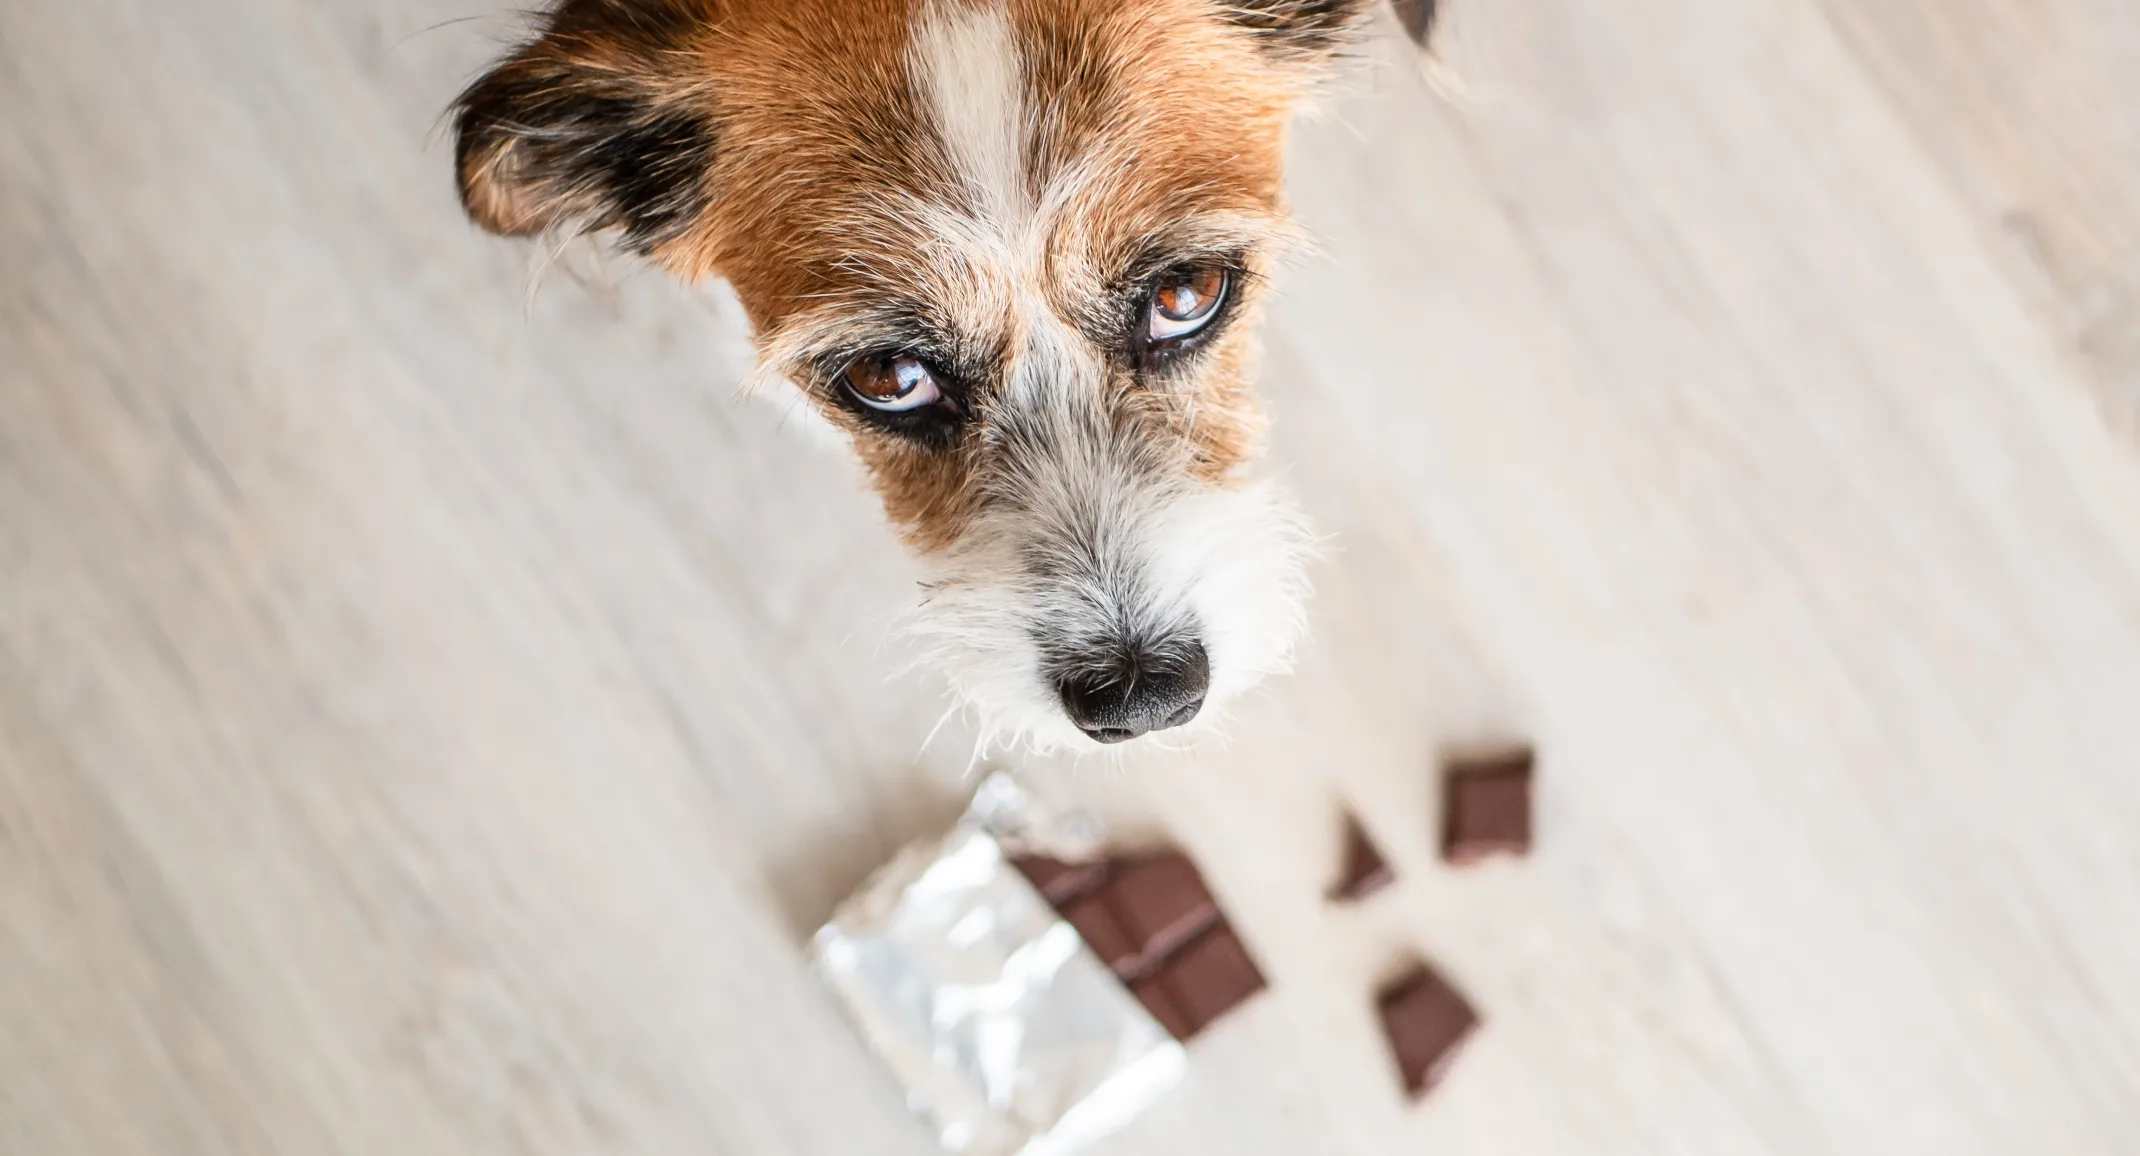 Dog looking up at owner with chocolate at its paws.